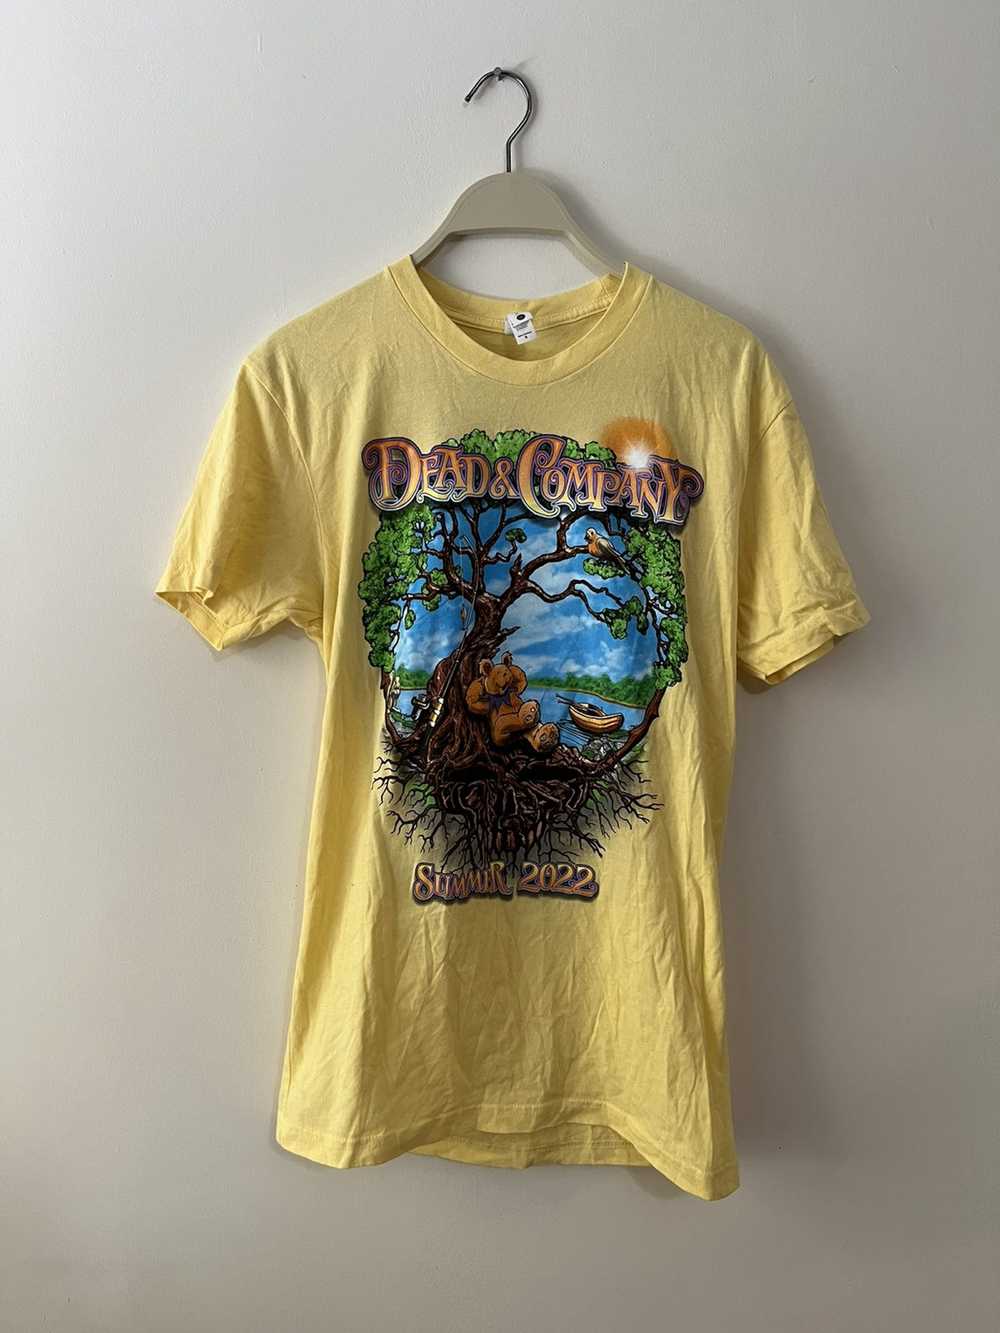 Grateful Dead Dead and Company 2022 Tour Tee Shirt - image 1